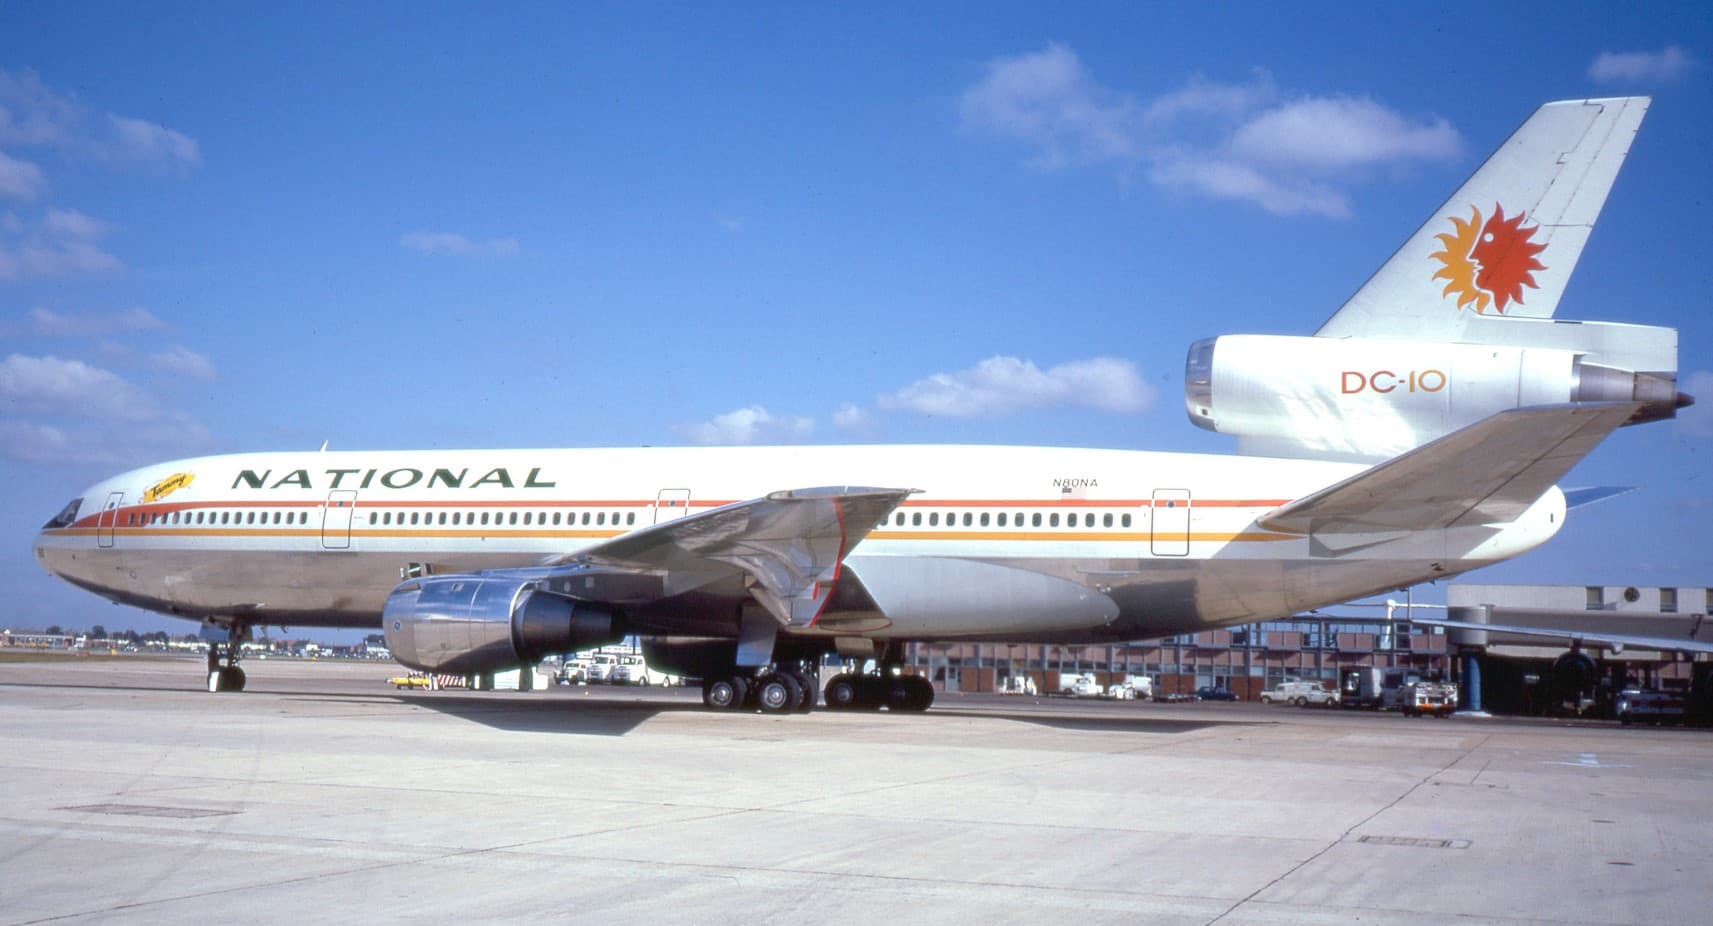 DC-10 at the airport.